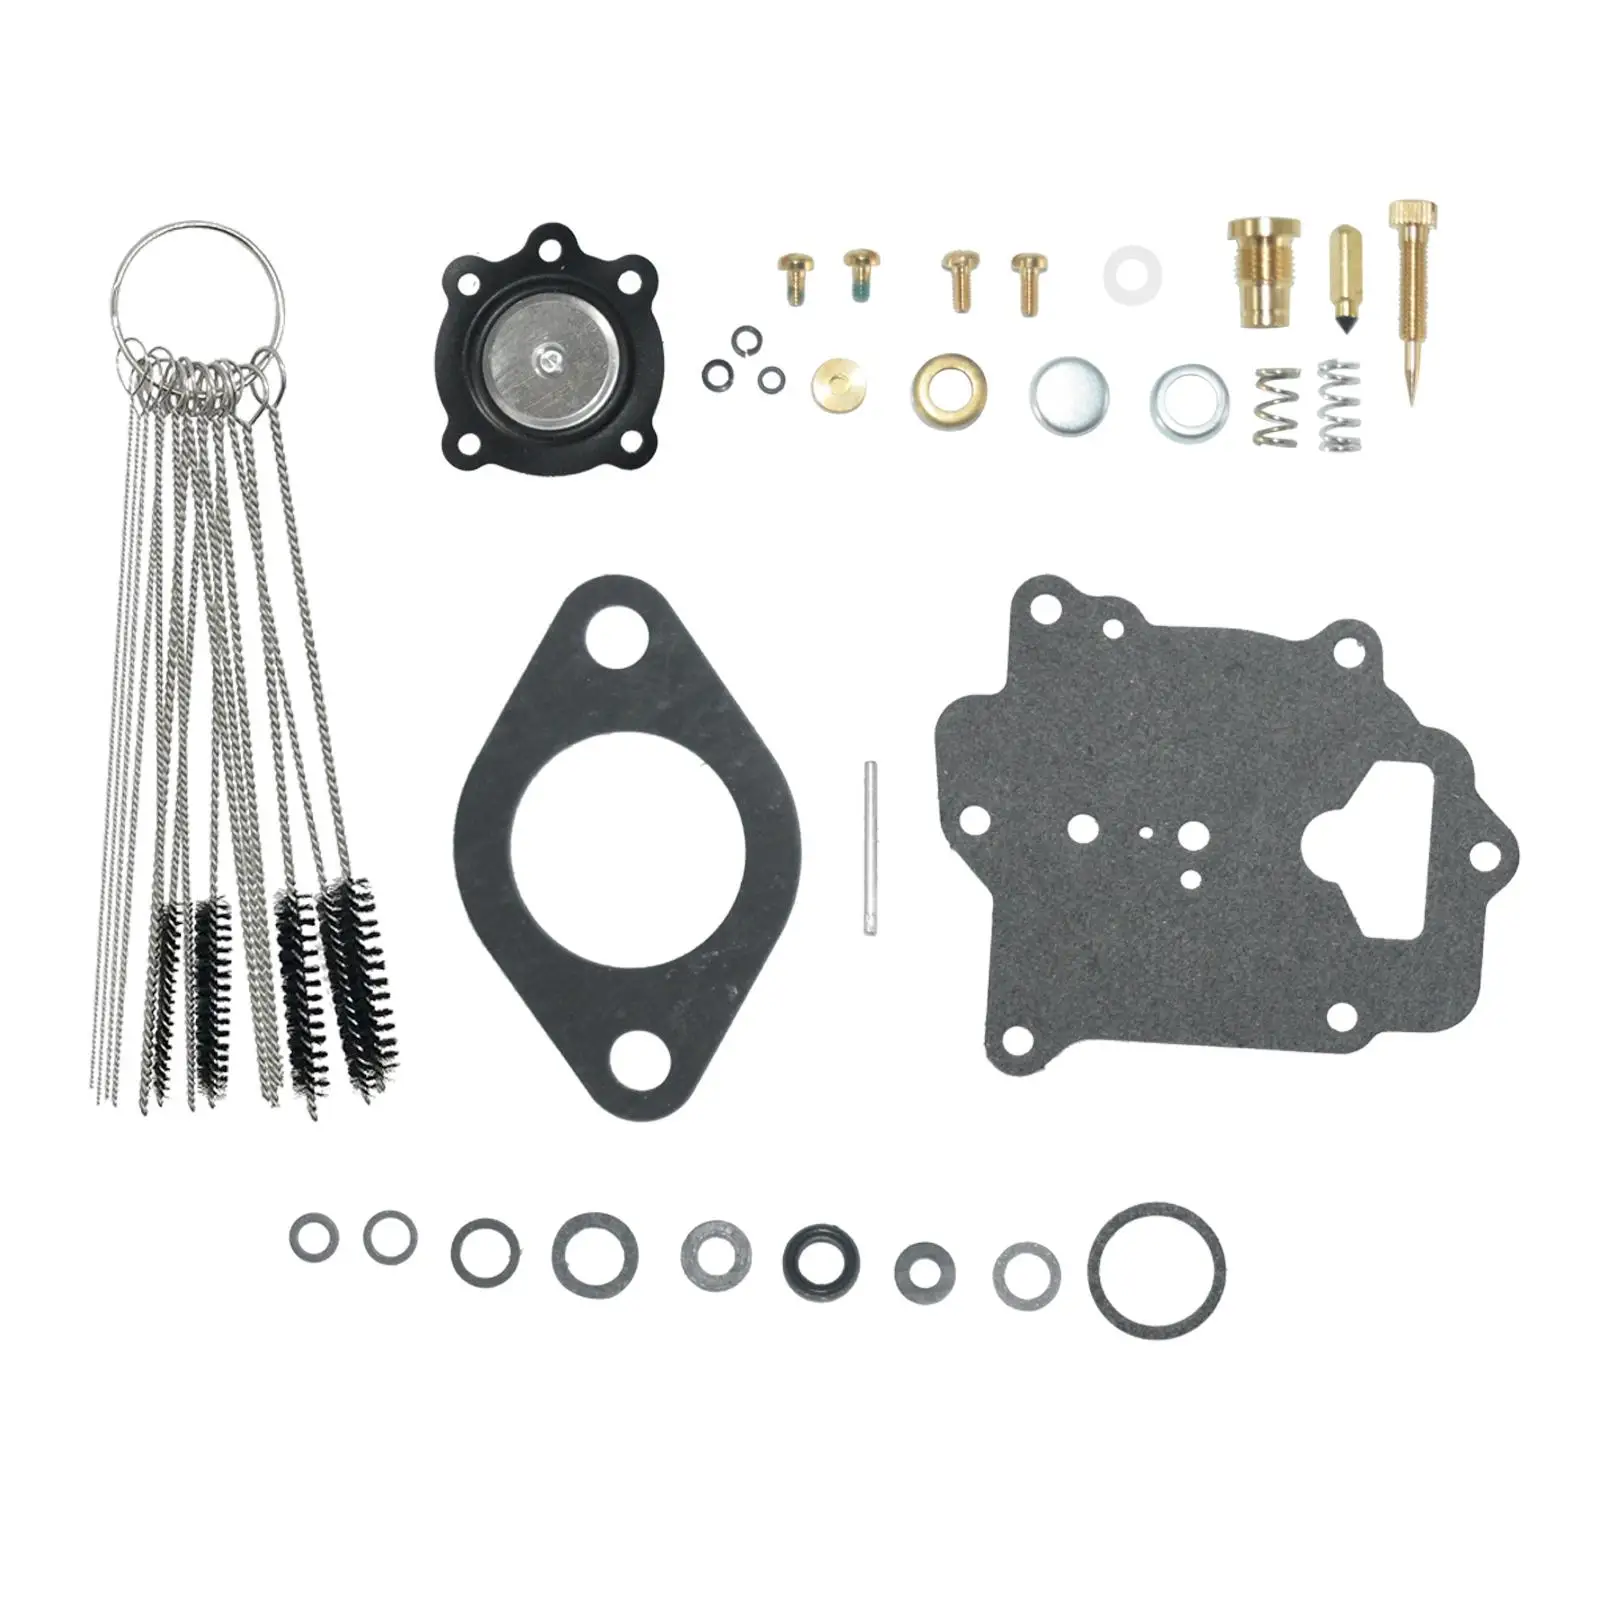 Carburetor Rebuild Kit Spare Parts Replacement Easy to Install 13660 Accessories Carburetor Kit for Jeep M151 Mutt Amc 151